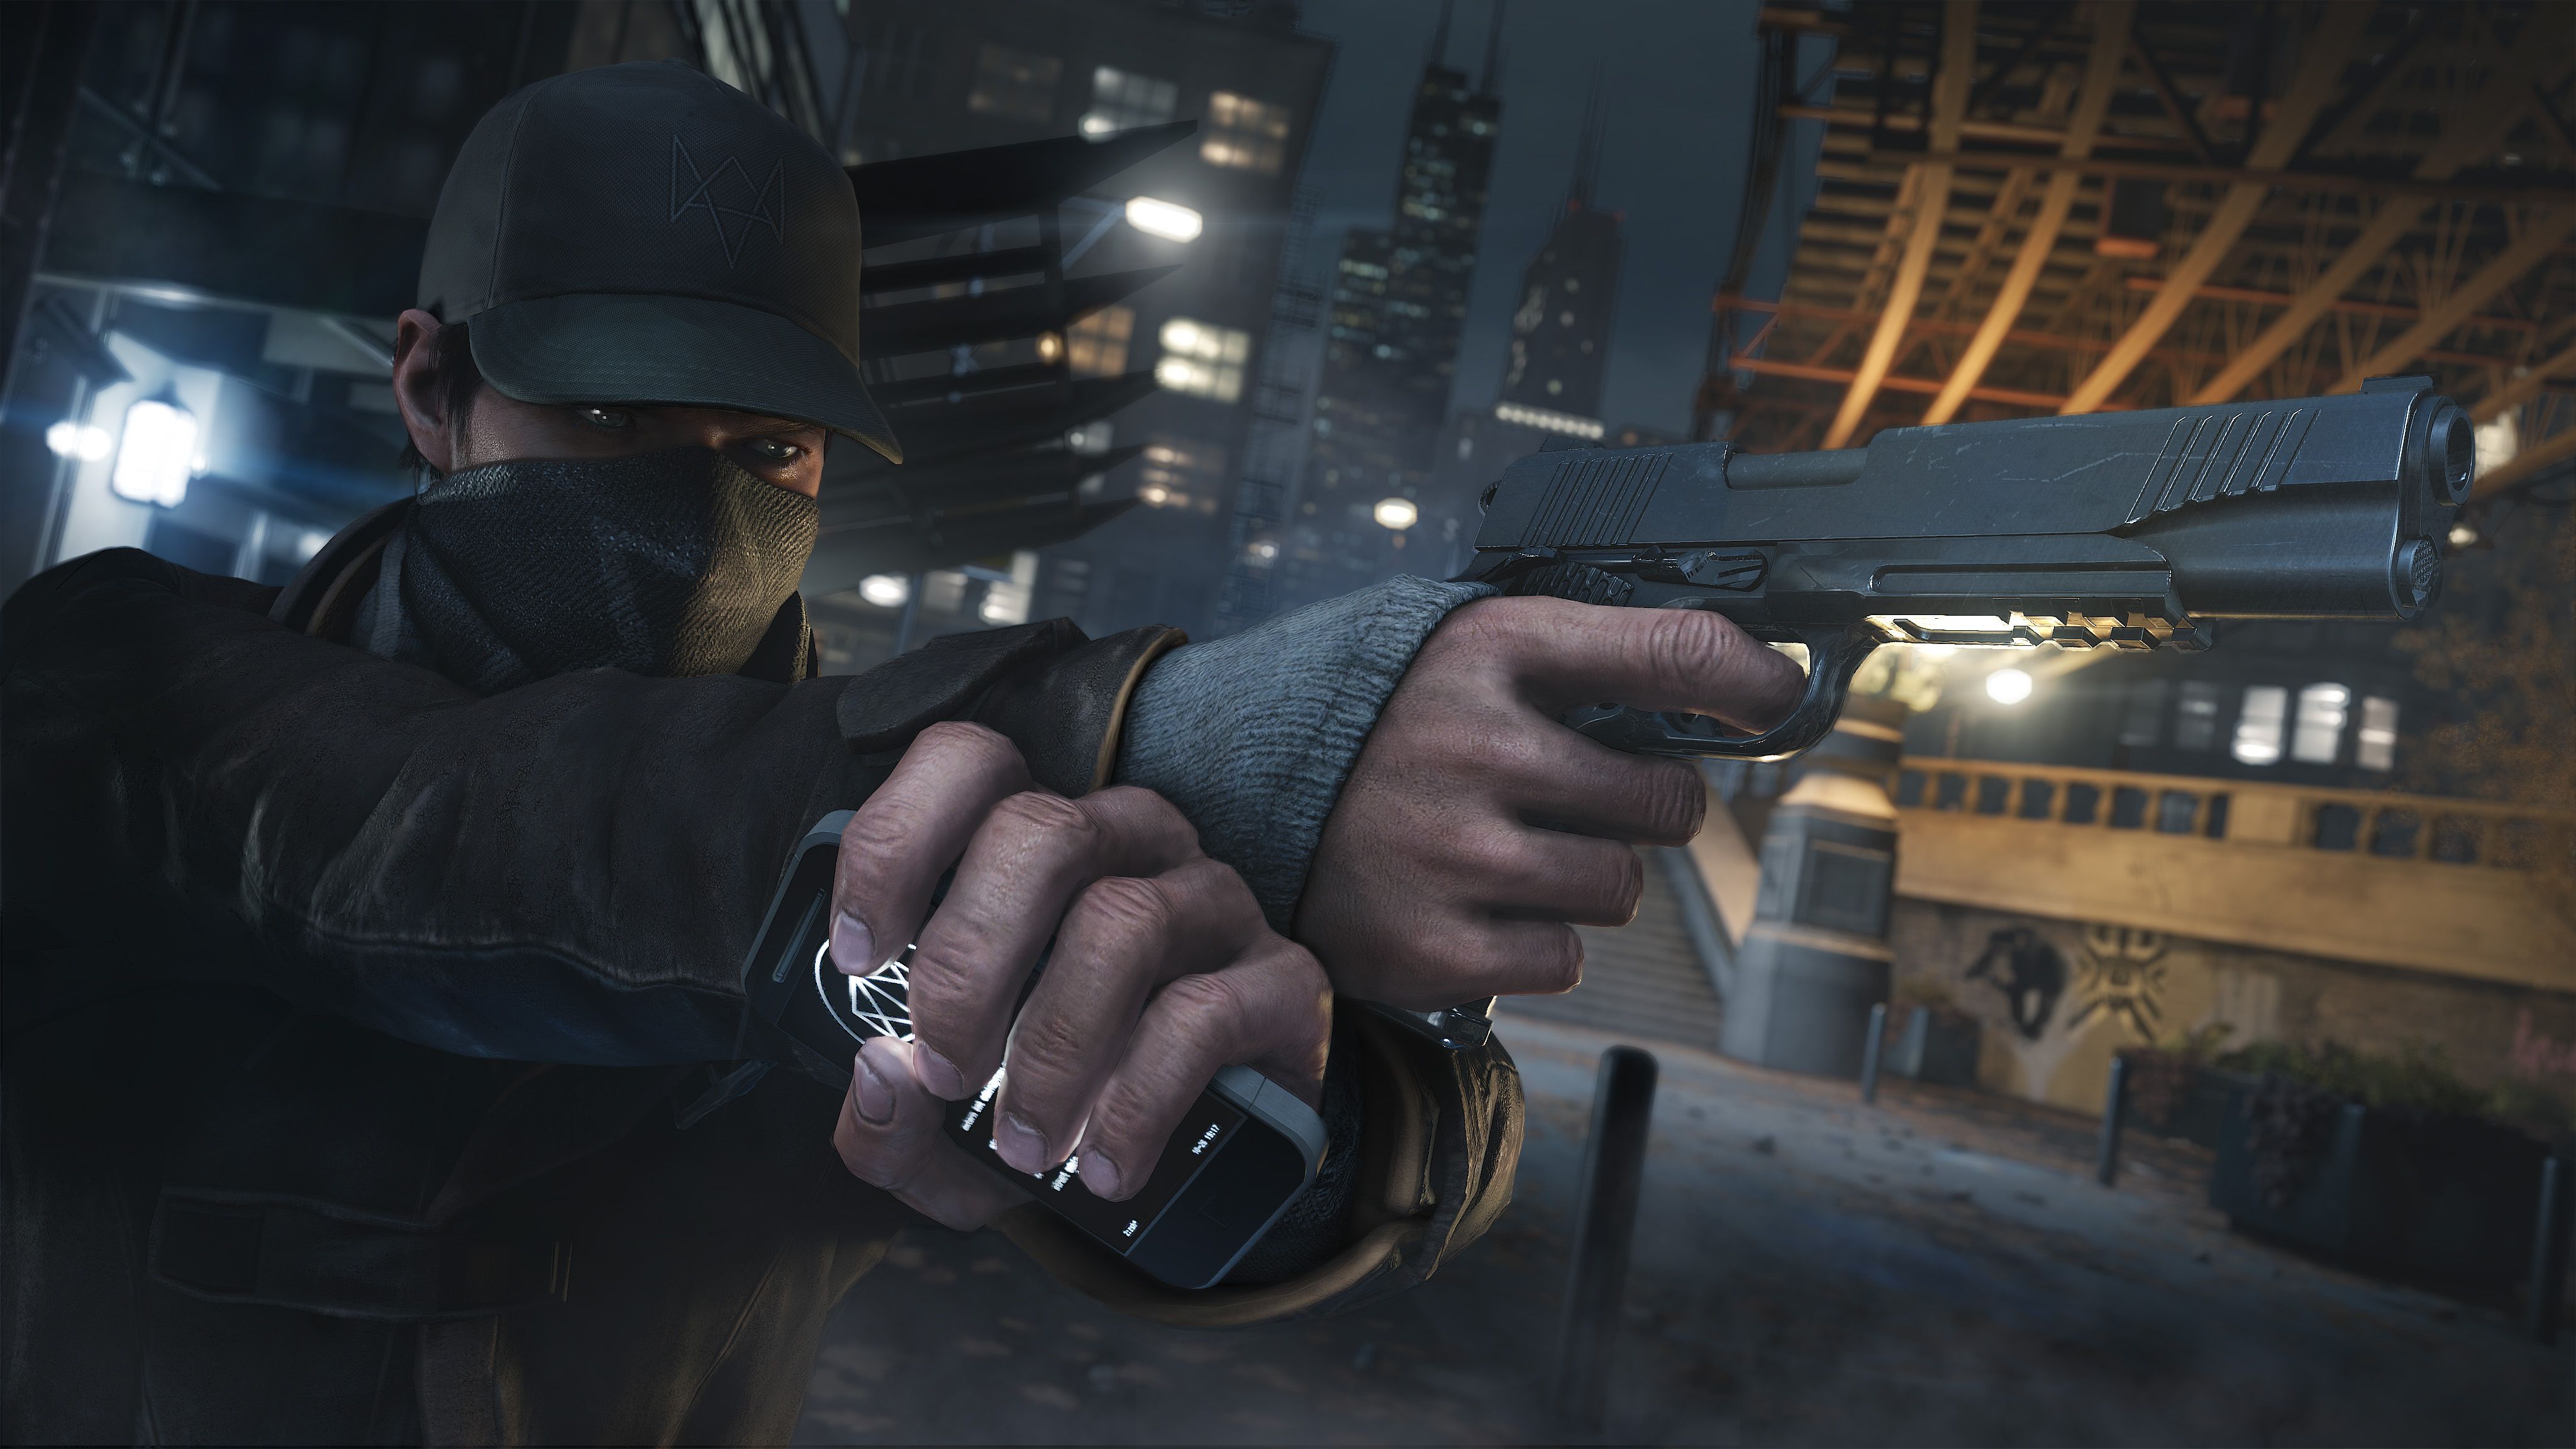 interview watch dogs creative director talks next gen the future of gaming apps and more image 17